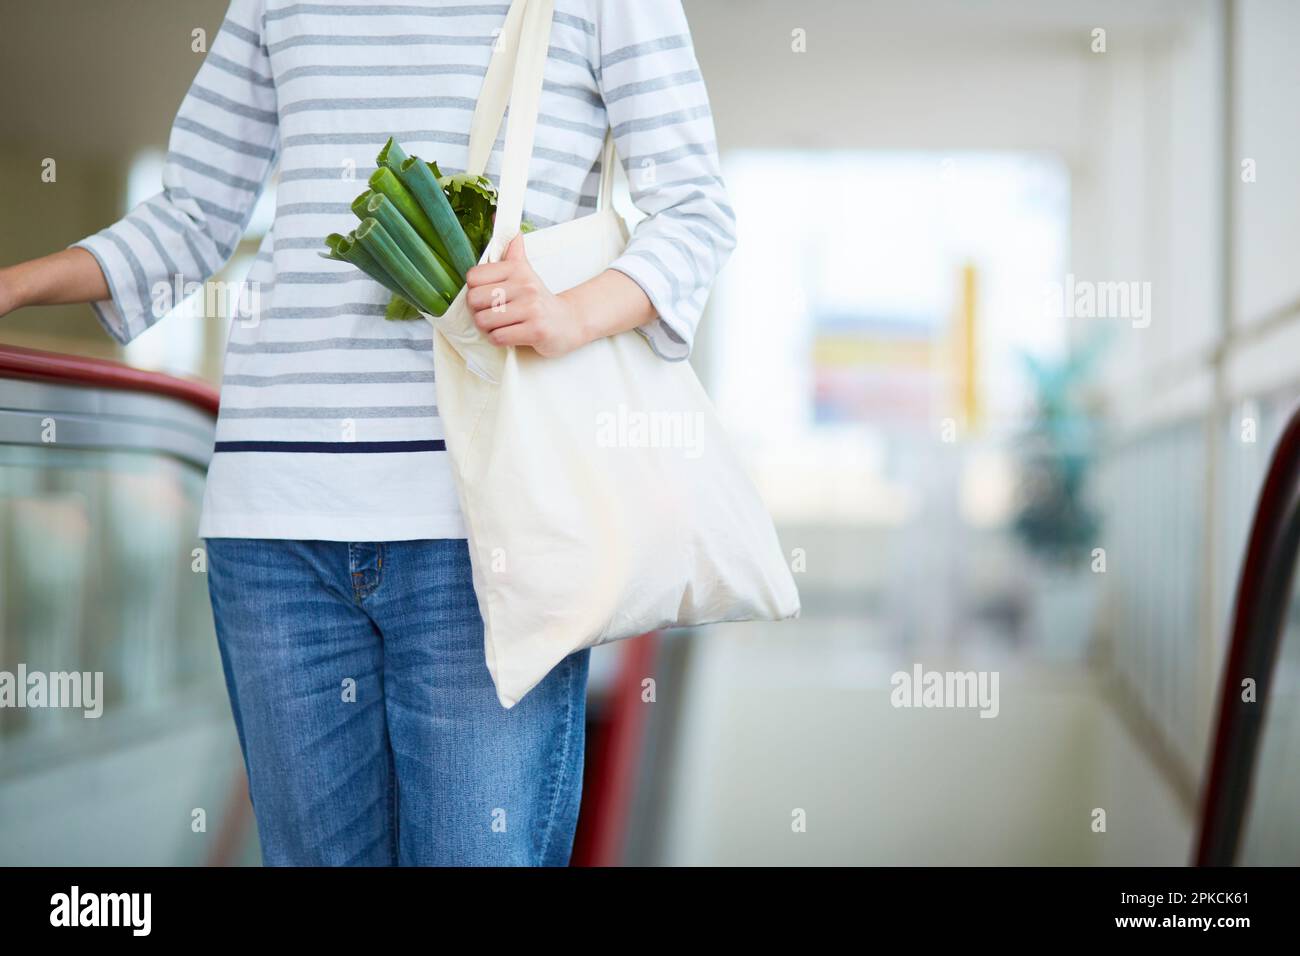 Woman carrying food in eco-bag Stock Photo